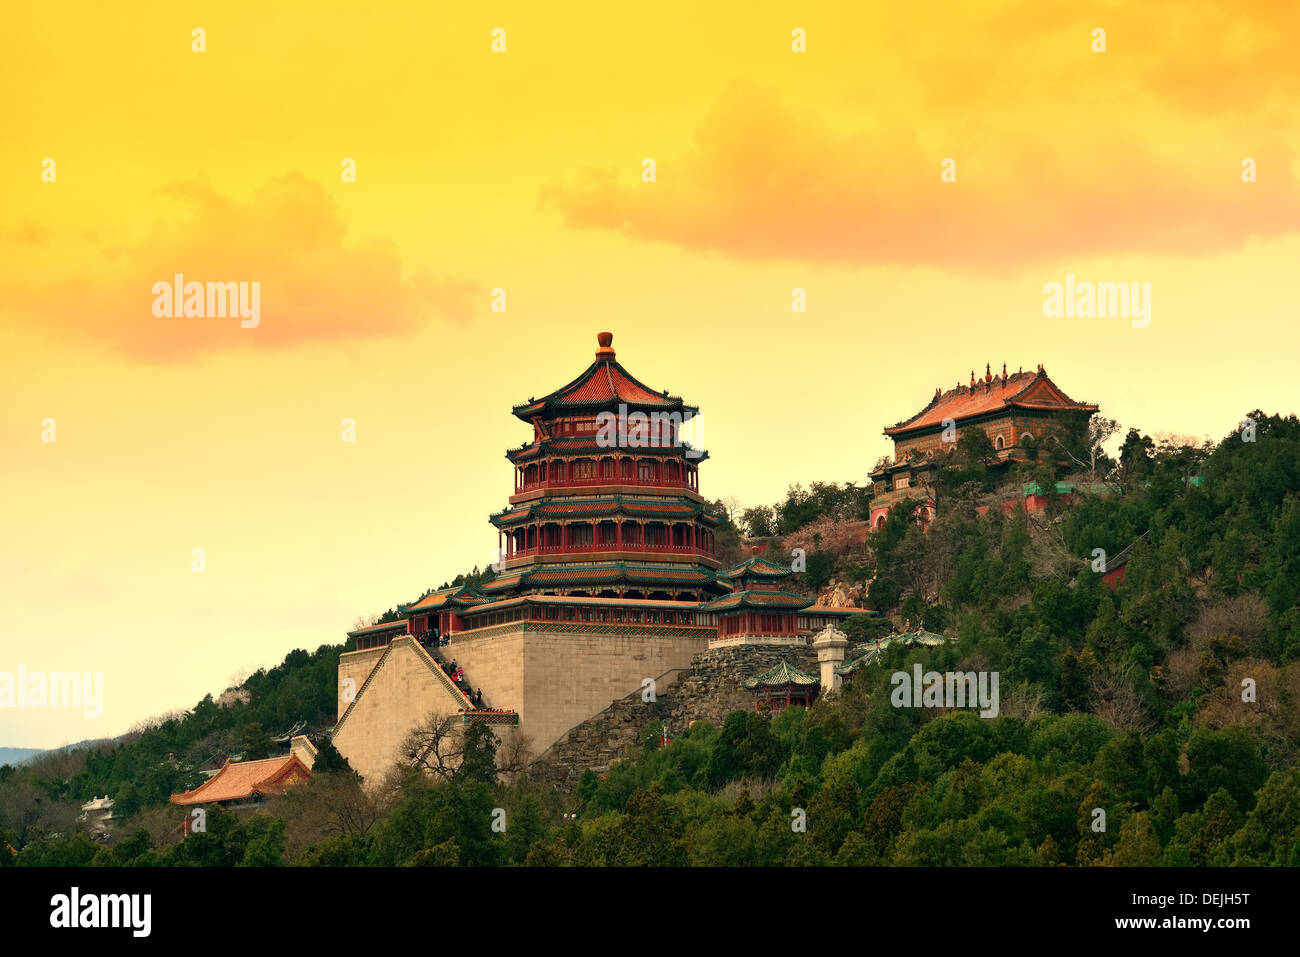 Summer Palace with historical architecture in Beijing. Stock Photo